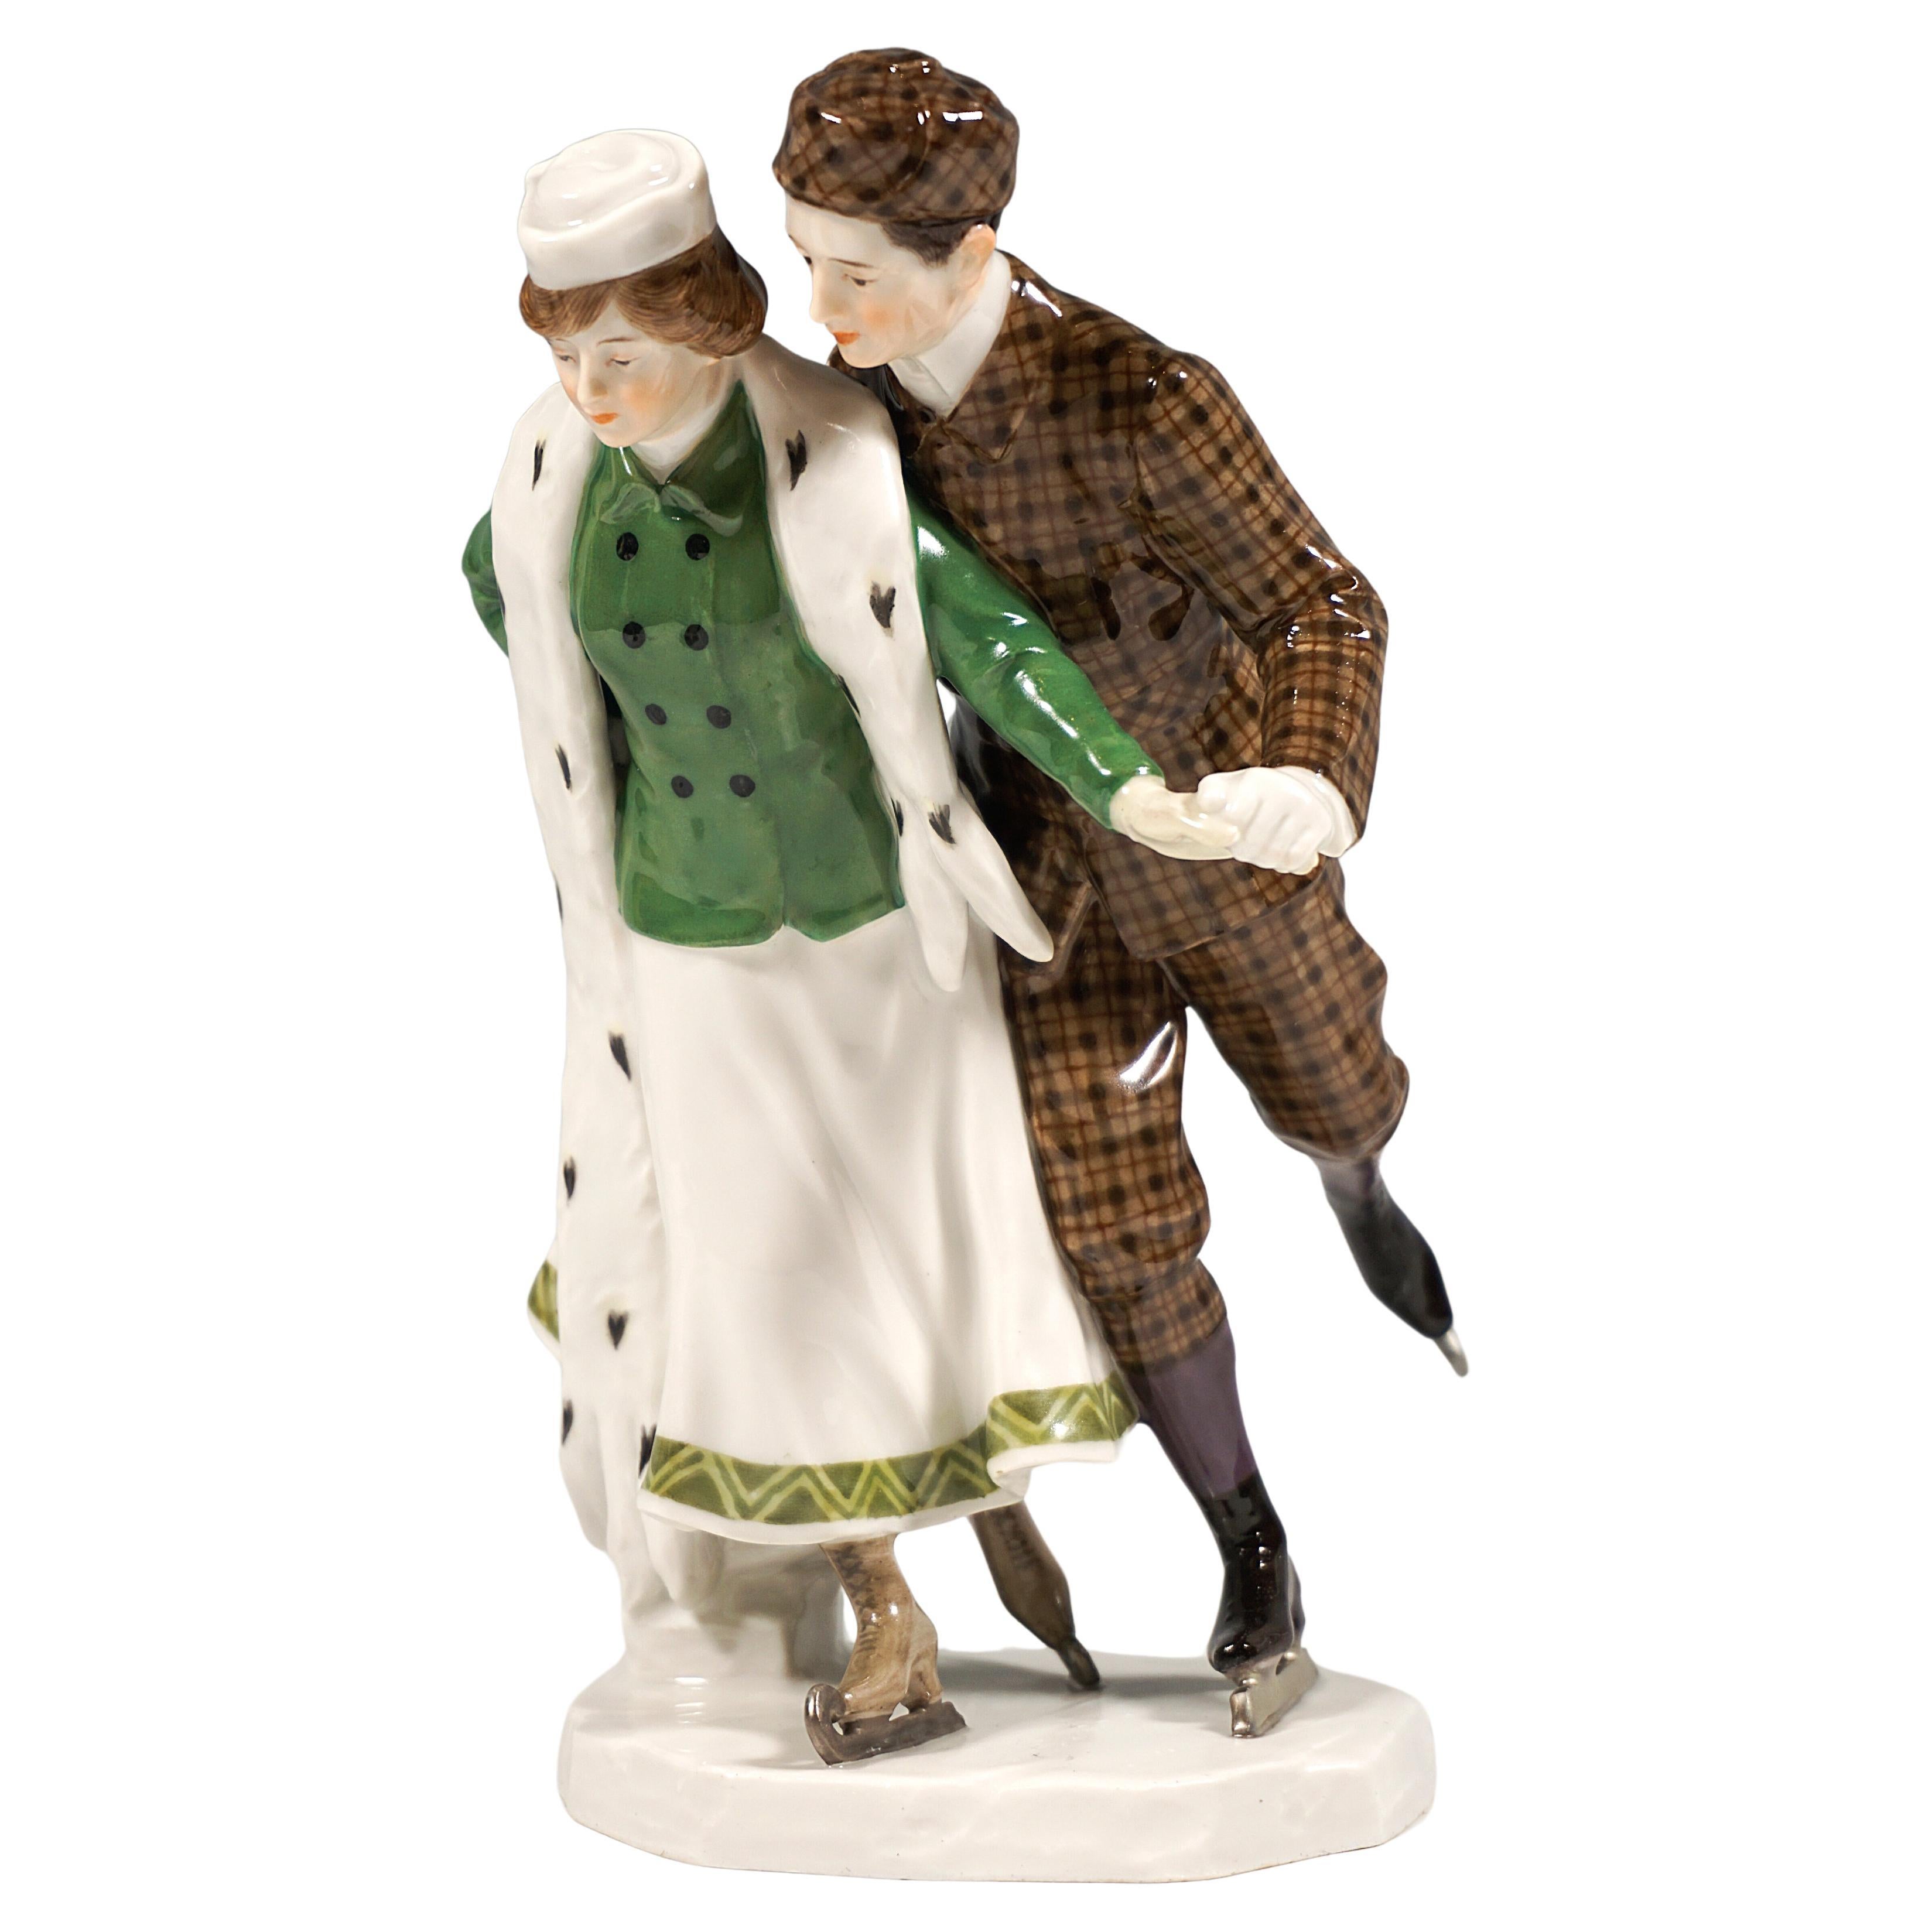 Art Nouveau Figure Group 'Ice-Scaters', by Alfred Koenig, Meissen Germany, 1910